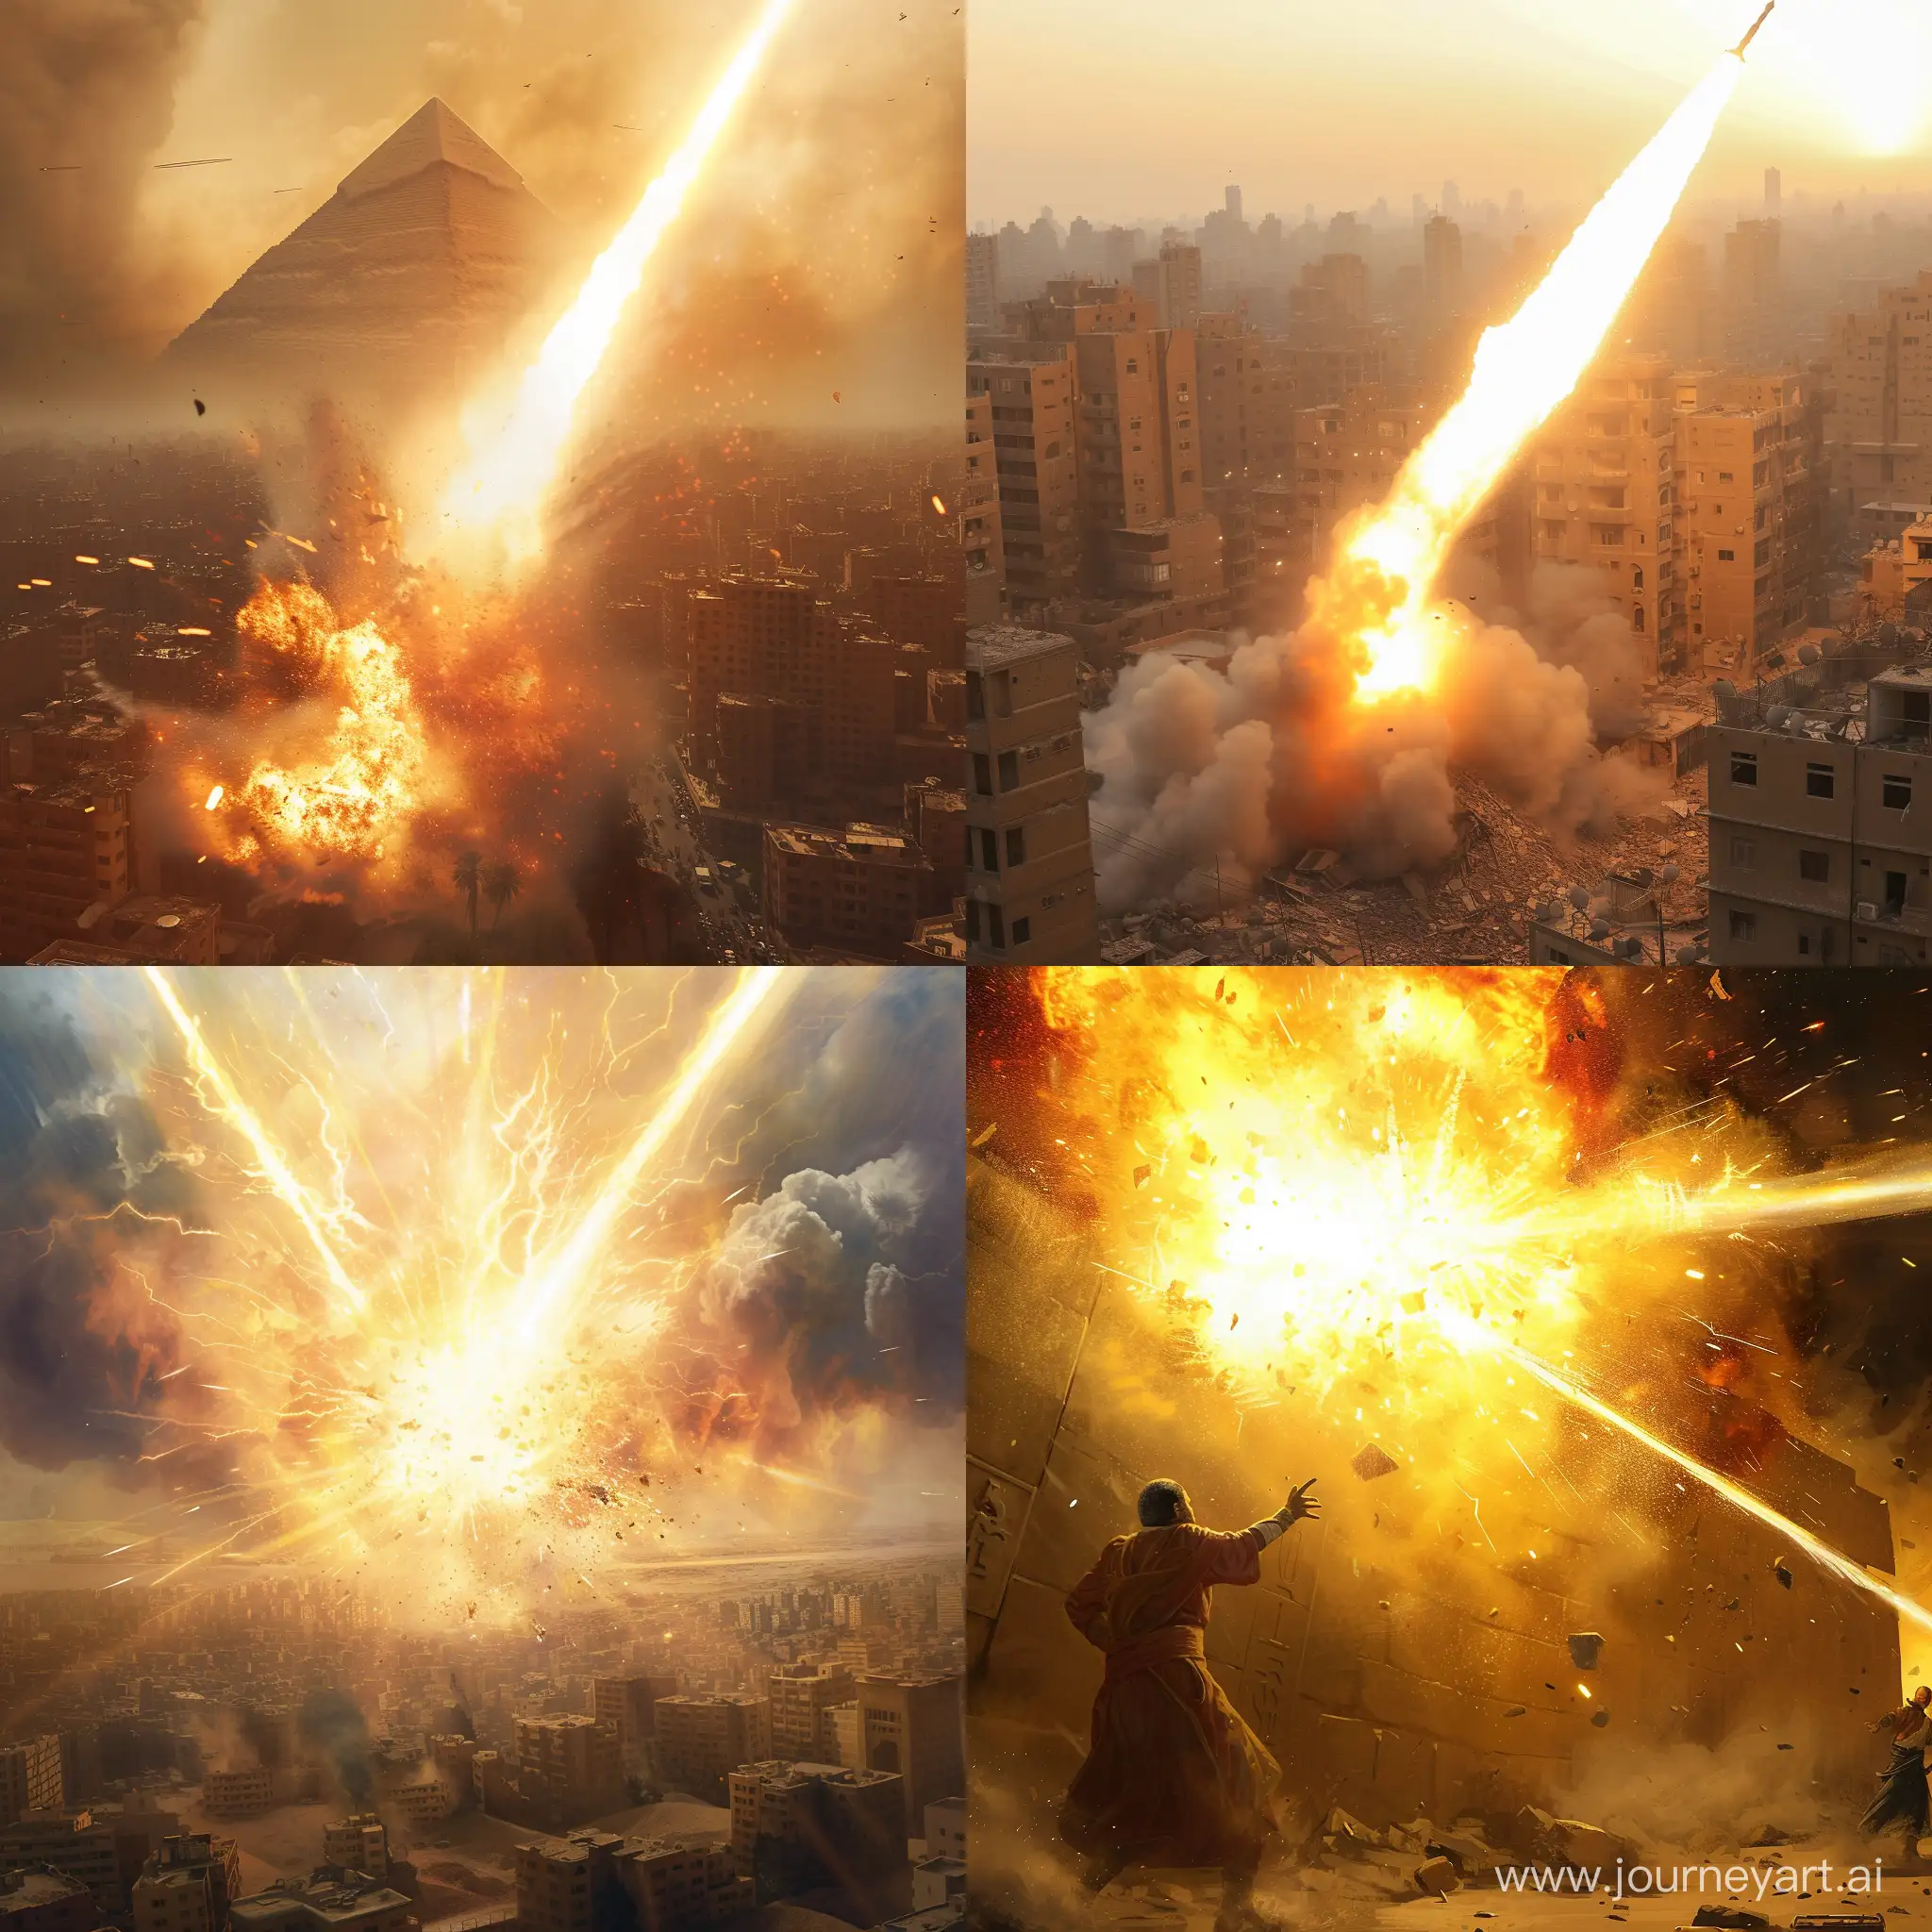 Abdel Fattah el Sisi, the president of Egypt, fired his Kamehameha, a blast of energy he had learned from a desert master. He hoped to end the civil war with one strike. But his rival, Mohamed Morsi, the former president, countered with his own Kamehameha. The two beams collided in a huge explosion, shaking Cairo